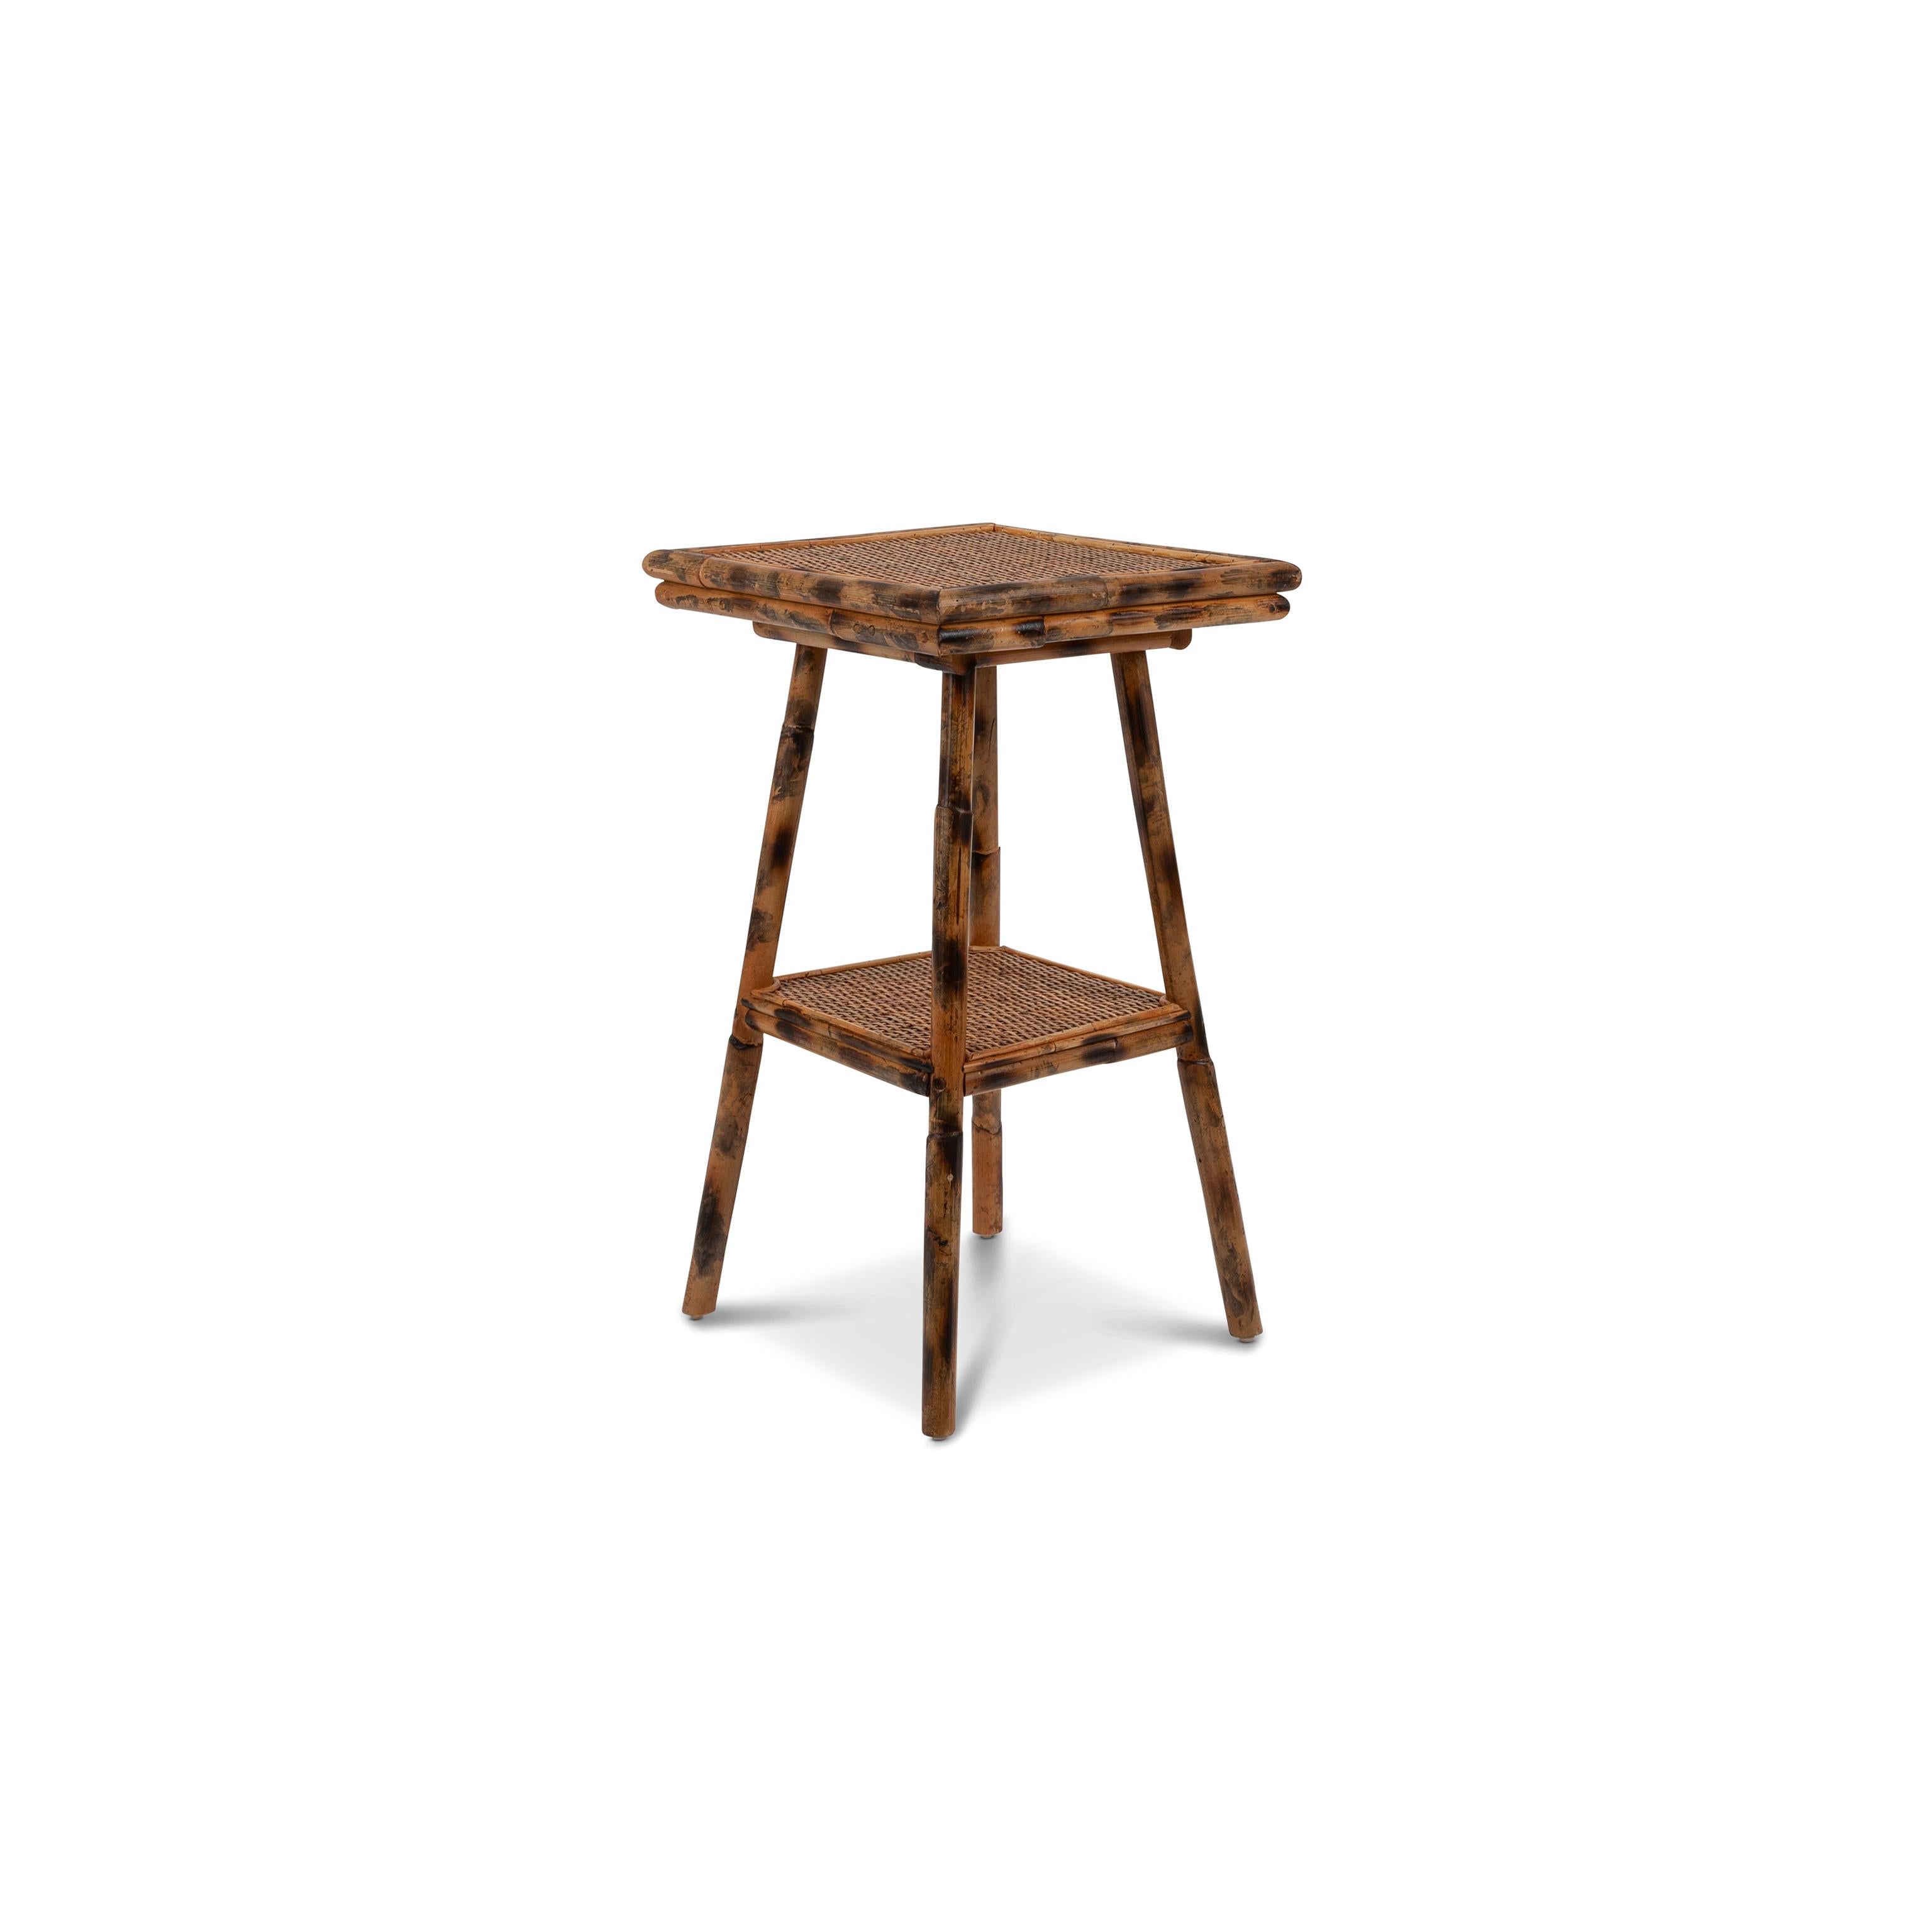 The Pimlico side table is neat and chic: its faux-bamboo legs, hand-crafted from beautiful torched rattan, call to mind the antique tables of a bygone era. Two tabletops make it practical for cups of tea by the sofa, books by the bedside or a